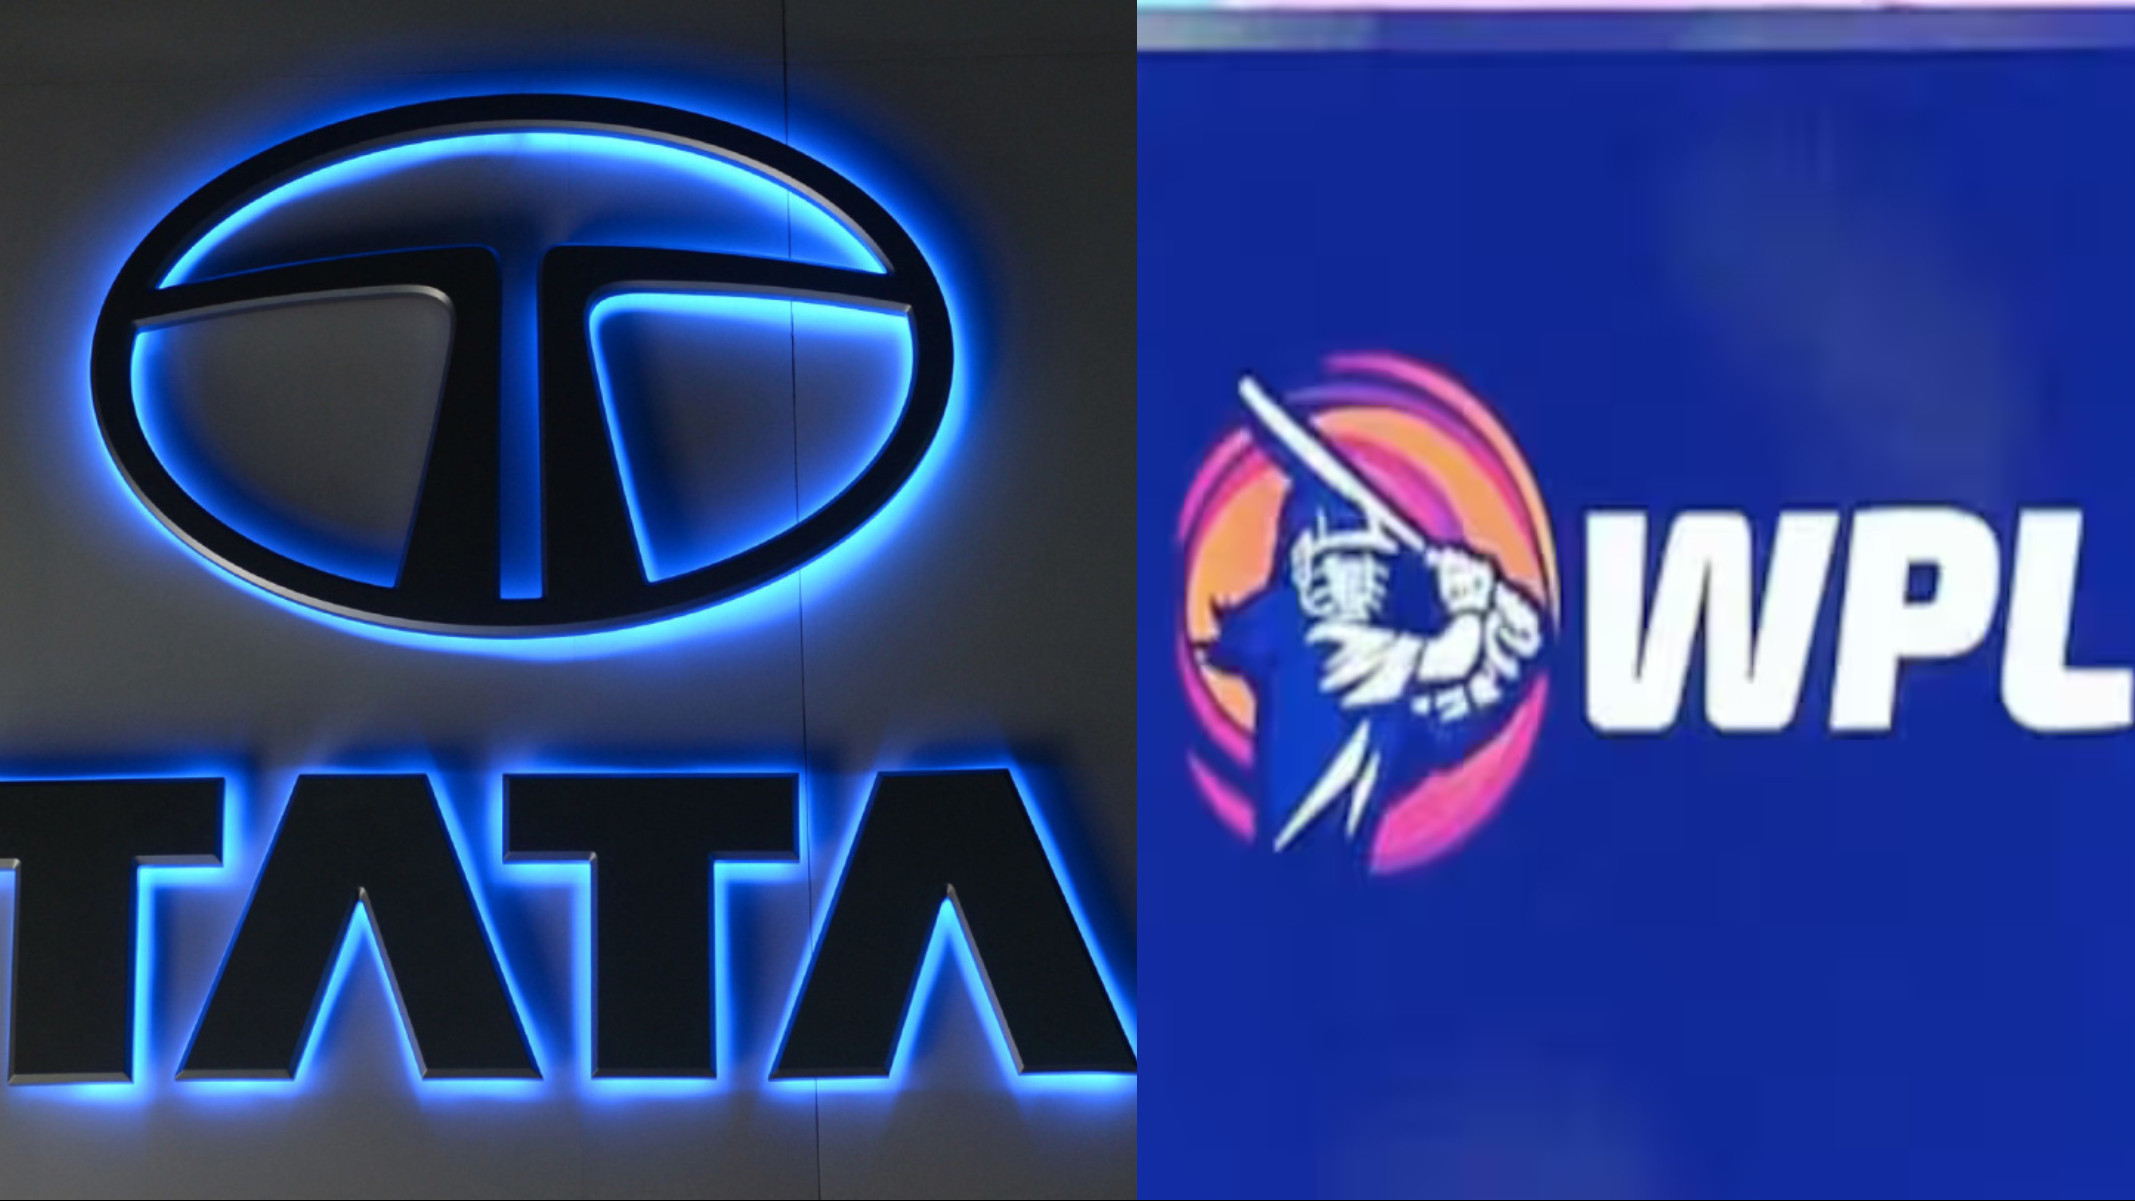 WPL title sponsorship rights awarded to Tata Group for five seasons starting 2023